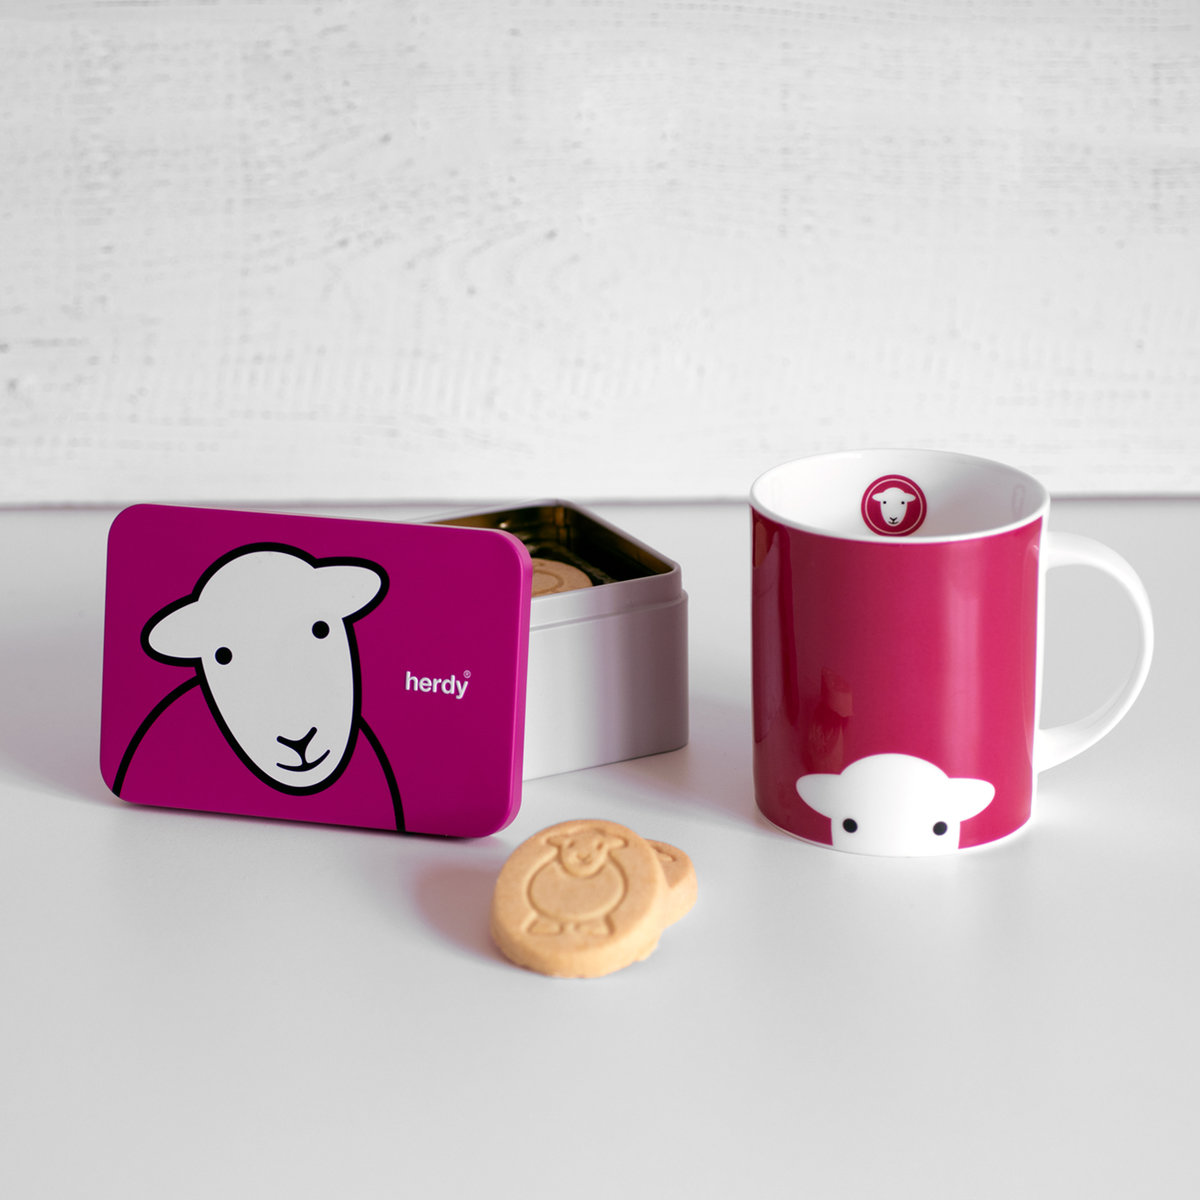 Collectors Edition Herdy Pink All Butter Shortbread Herdy Shapes 120g